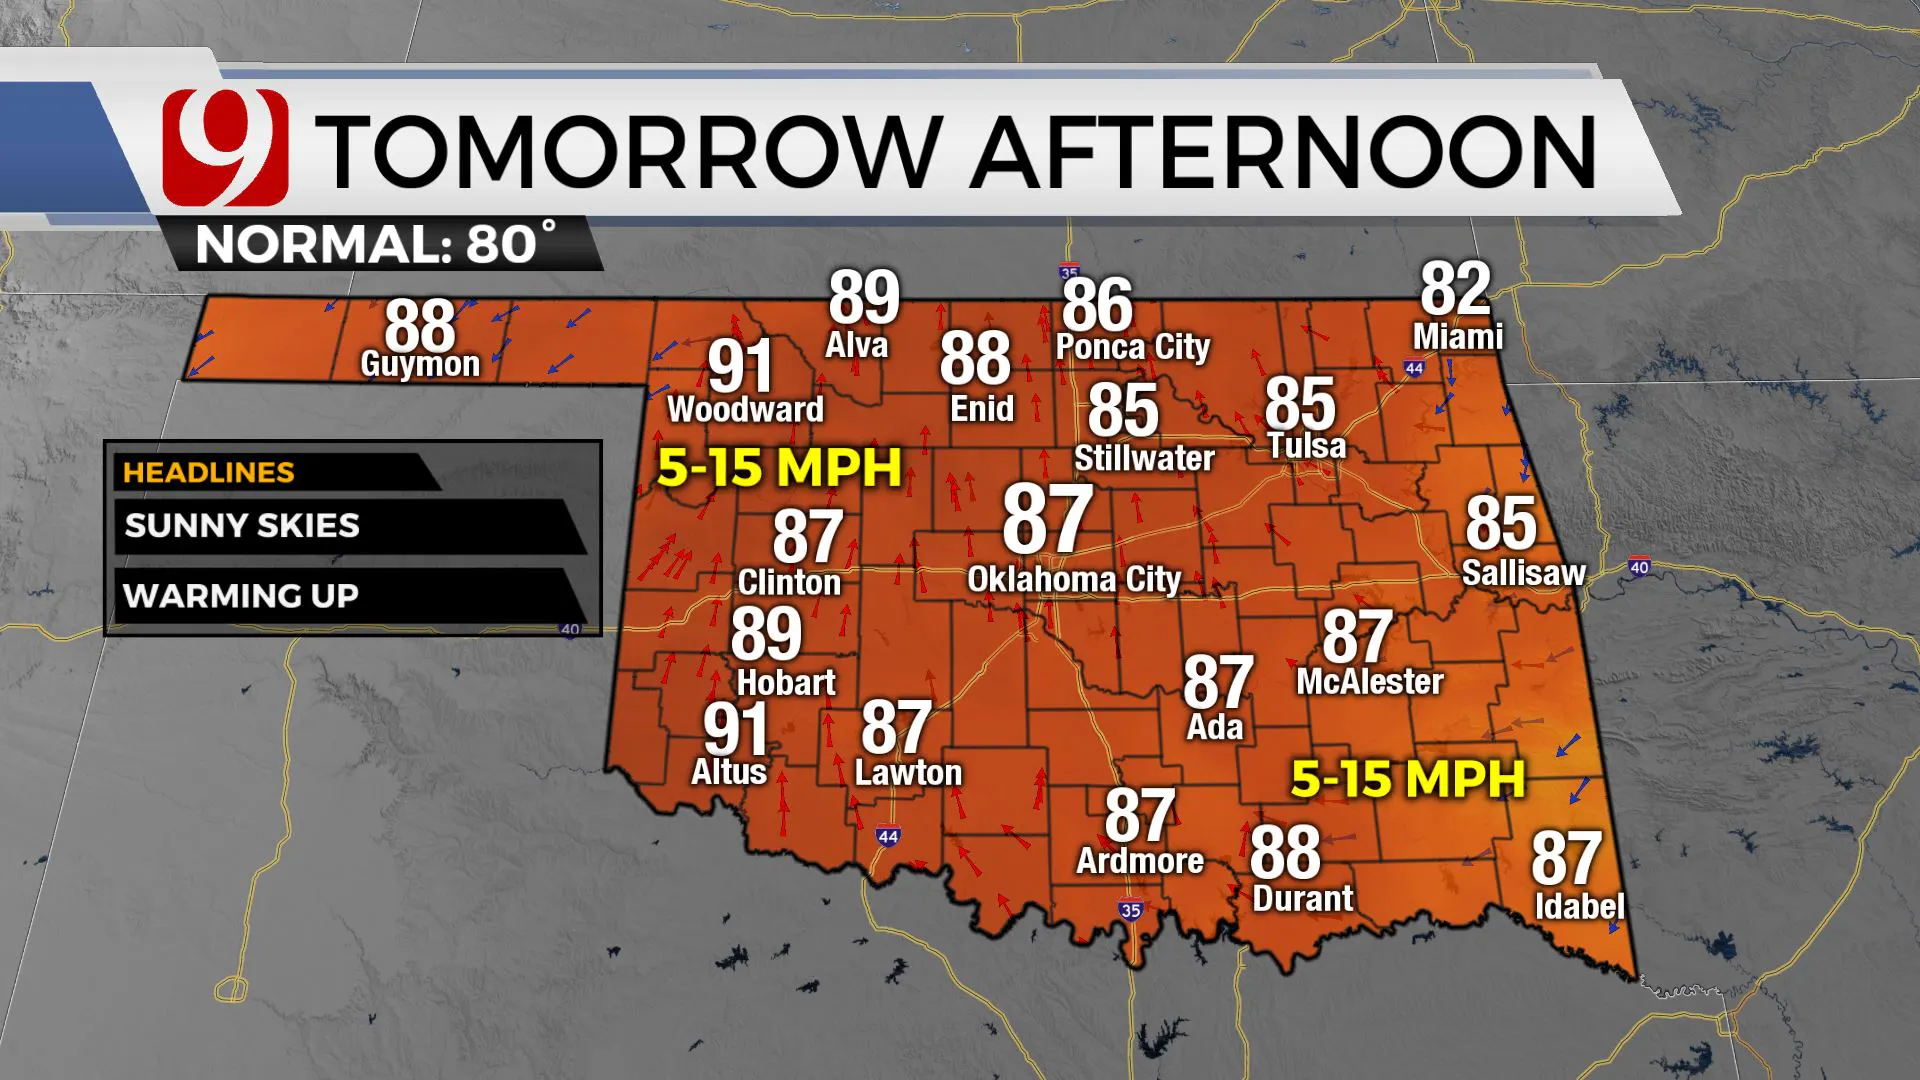 Tomorrow afternoon temps across the state.